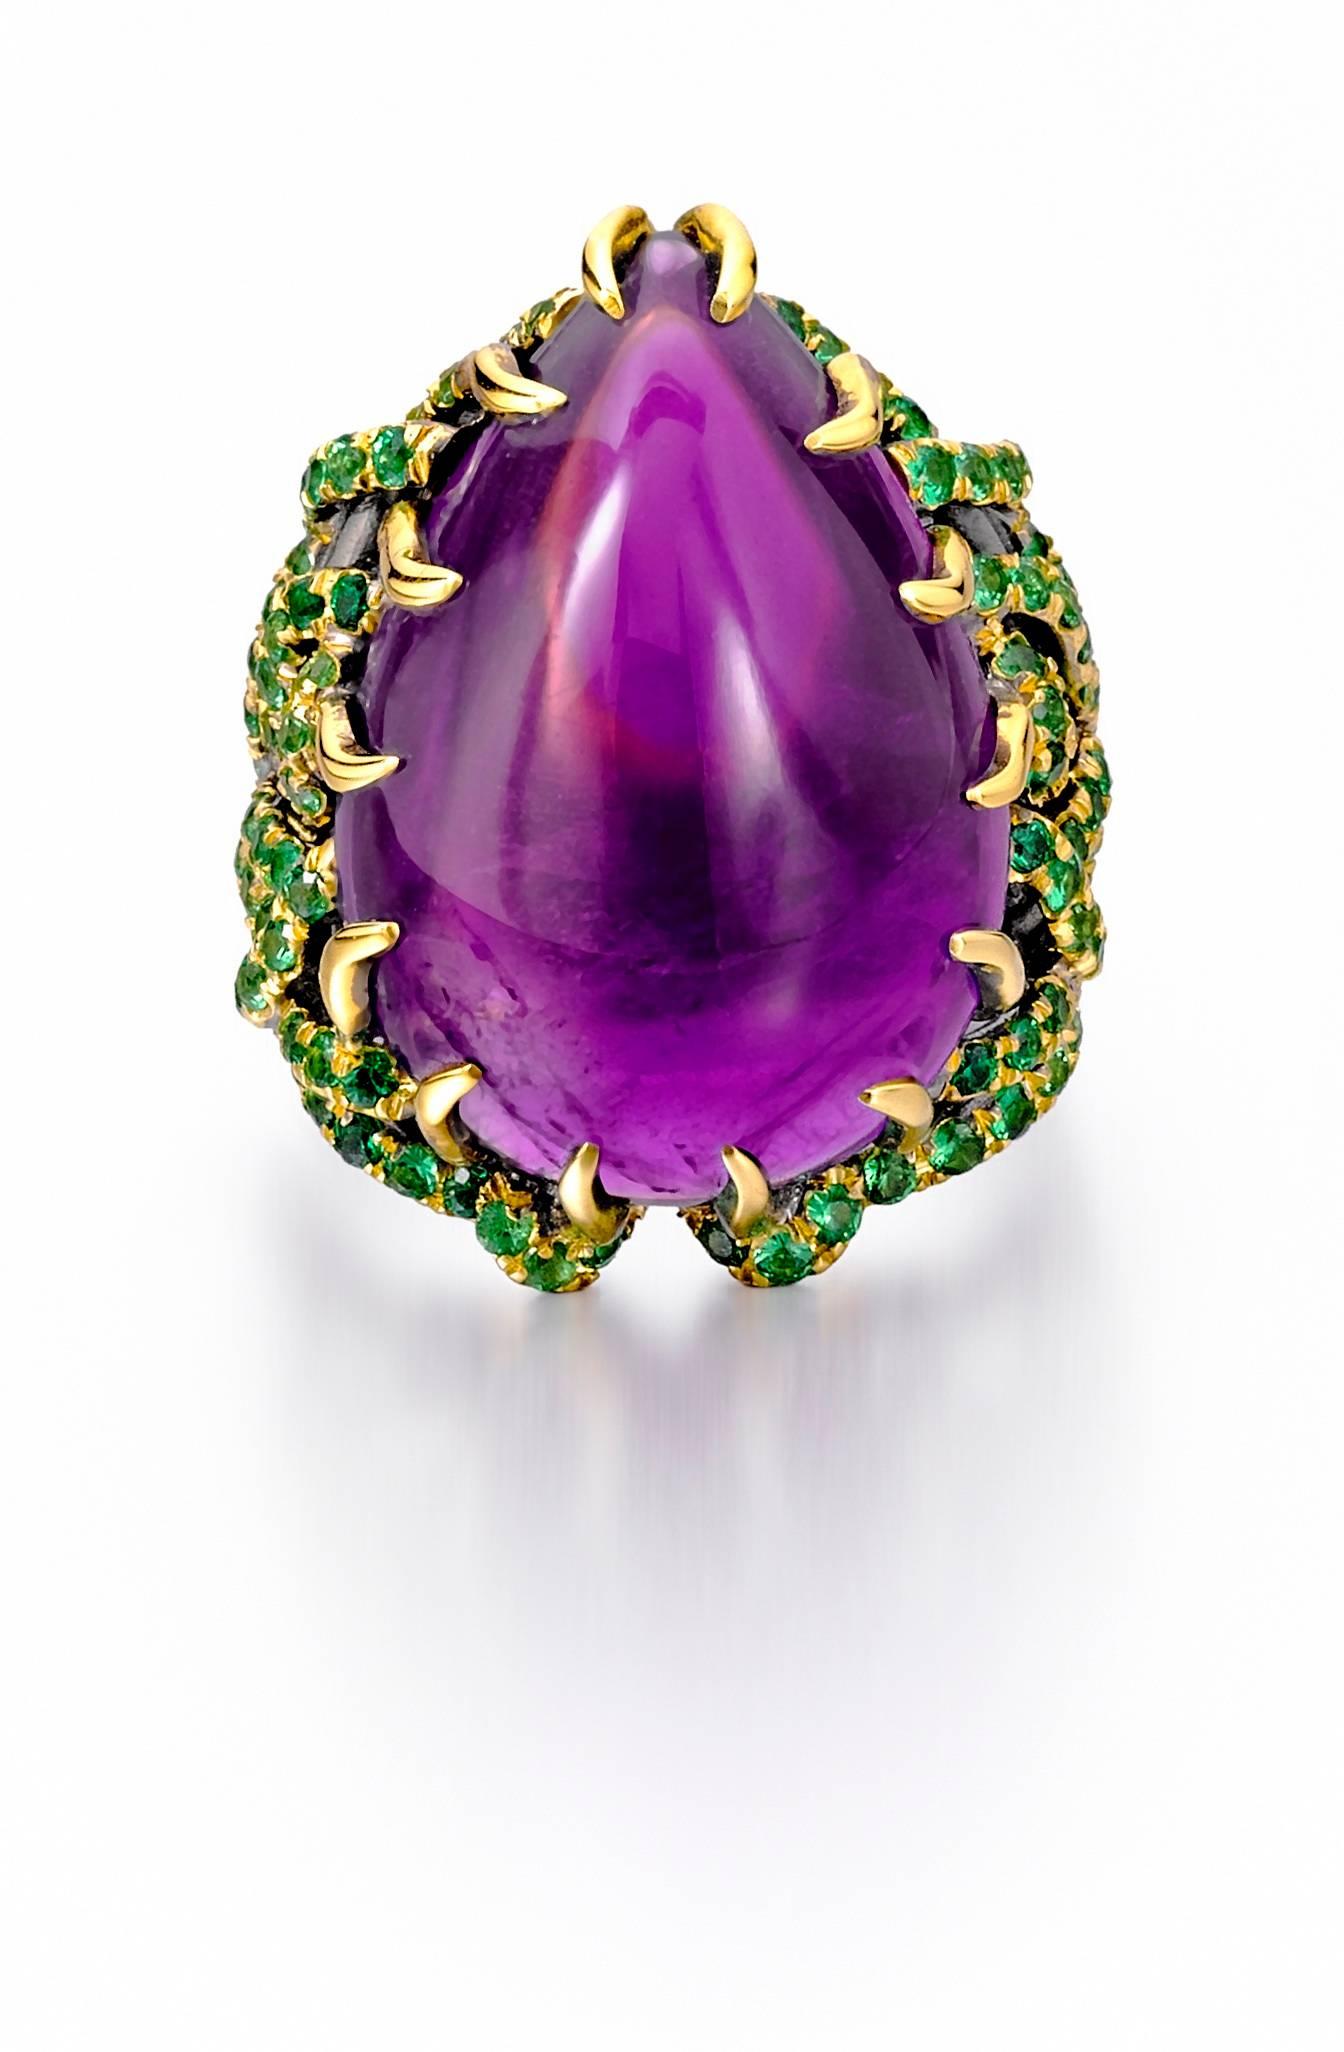 This gorgeous ring and earring suite was inspired by the true story of Marie Antoinette. Creating these labor-intensive pieces took months, with each pavé tsavorite being set by hand by a gem setter who has truly mastered his craft. The combination